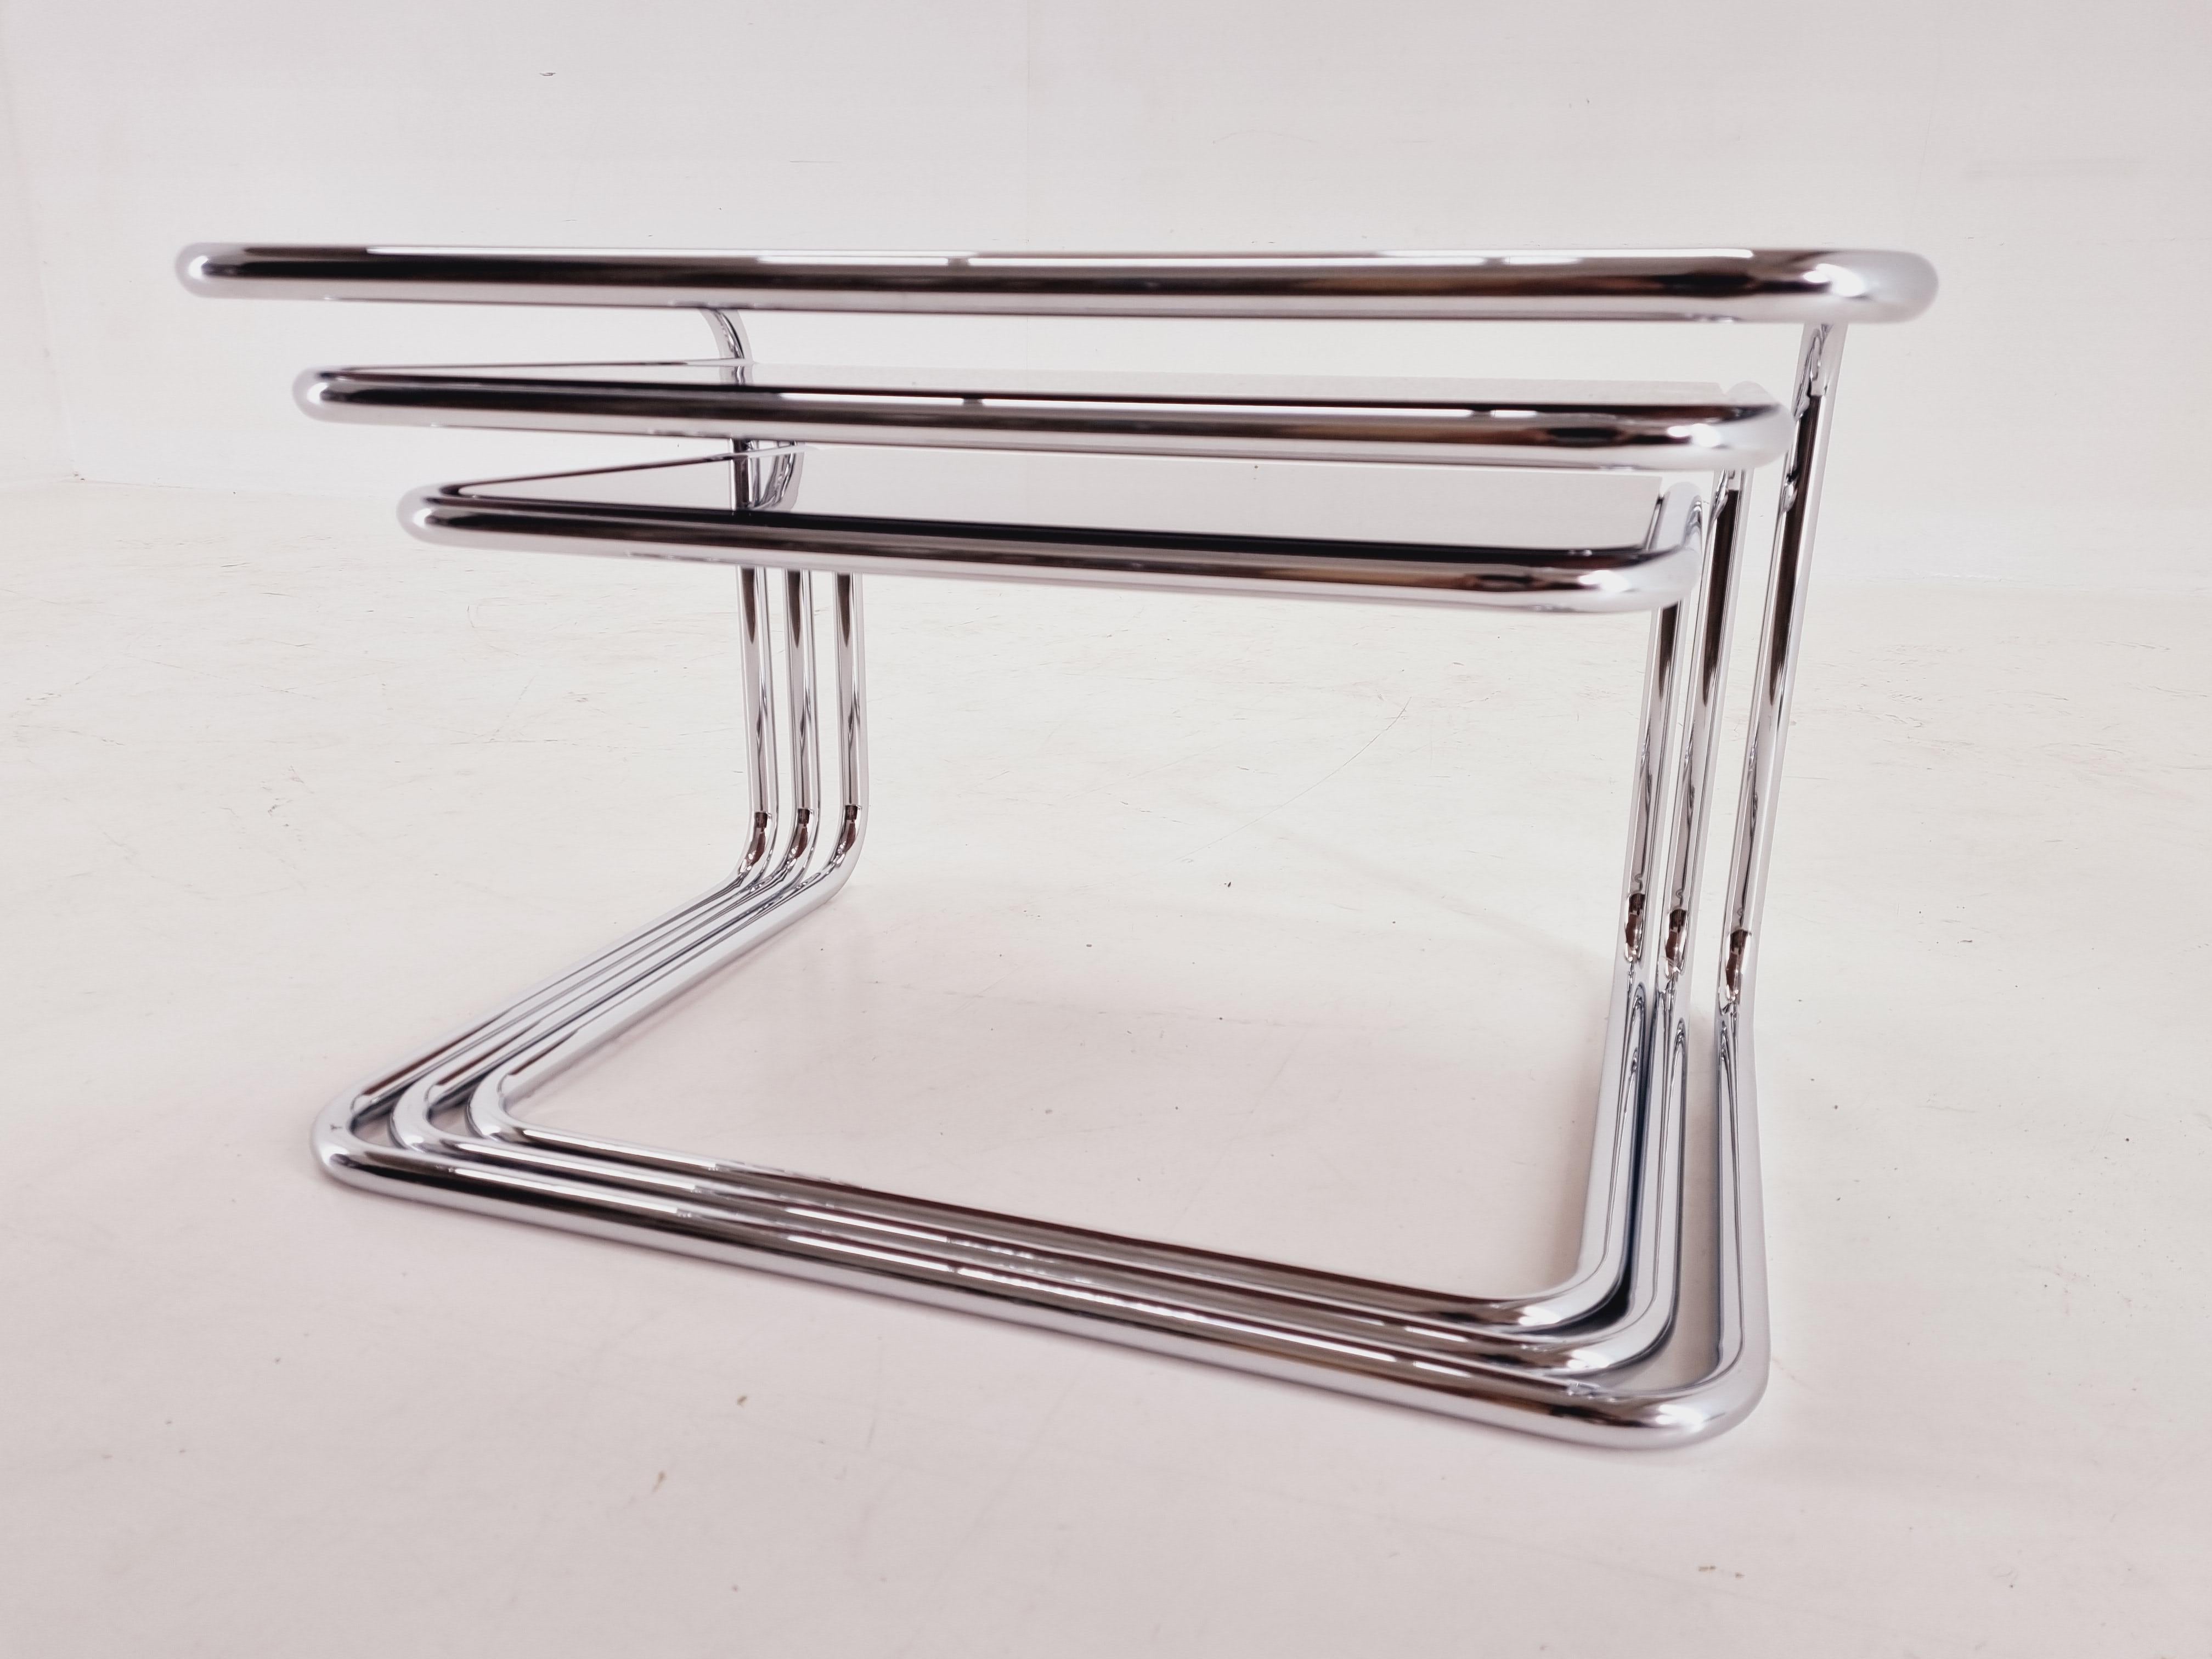 Exclusive Rare Midcentury Nesting Tables, Cocobolo Palisandr and Chrome, 1950s. For Sale 10